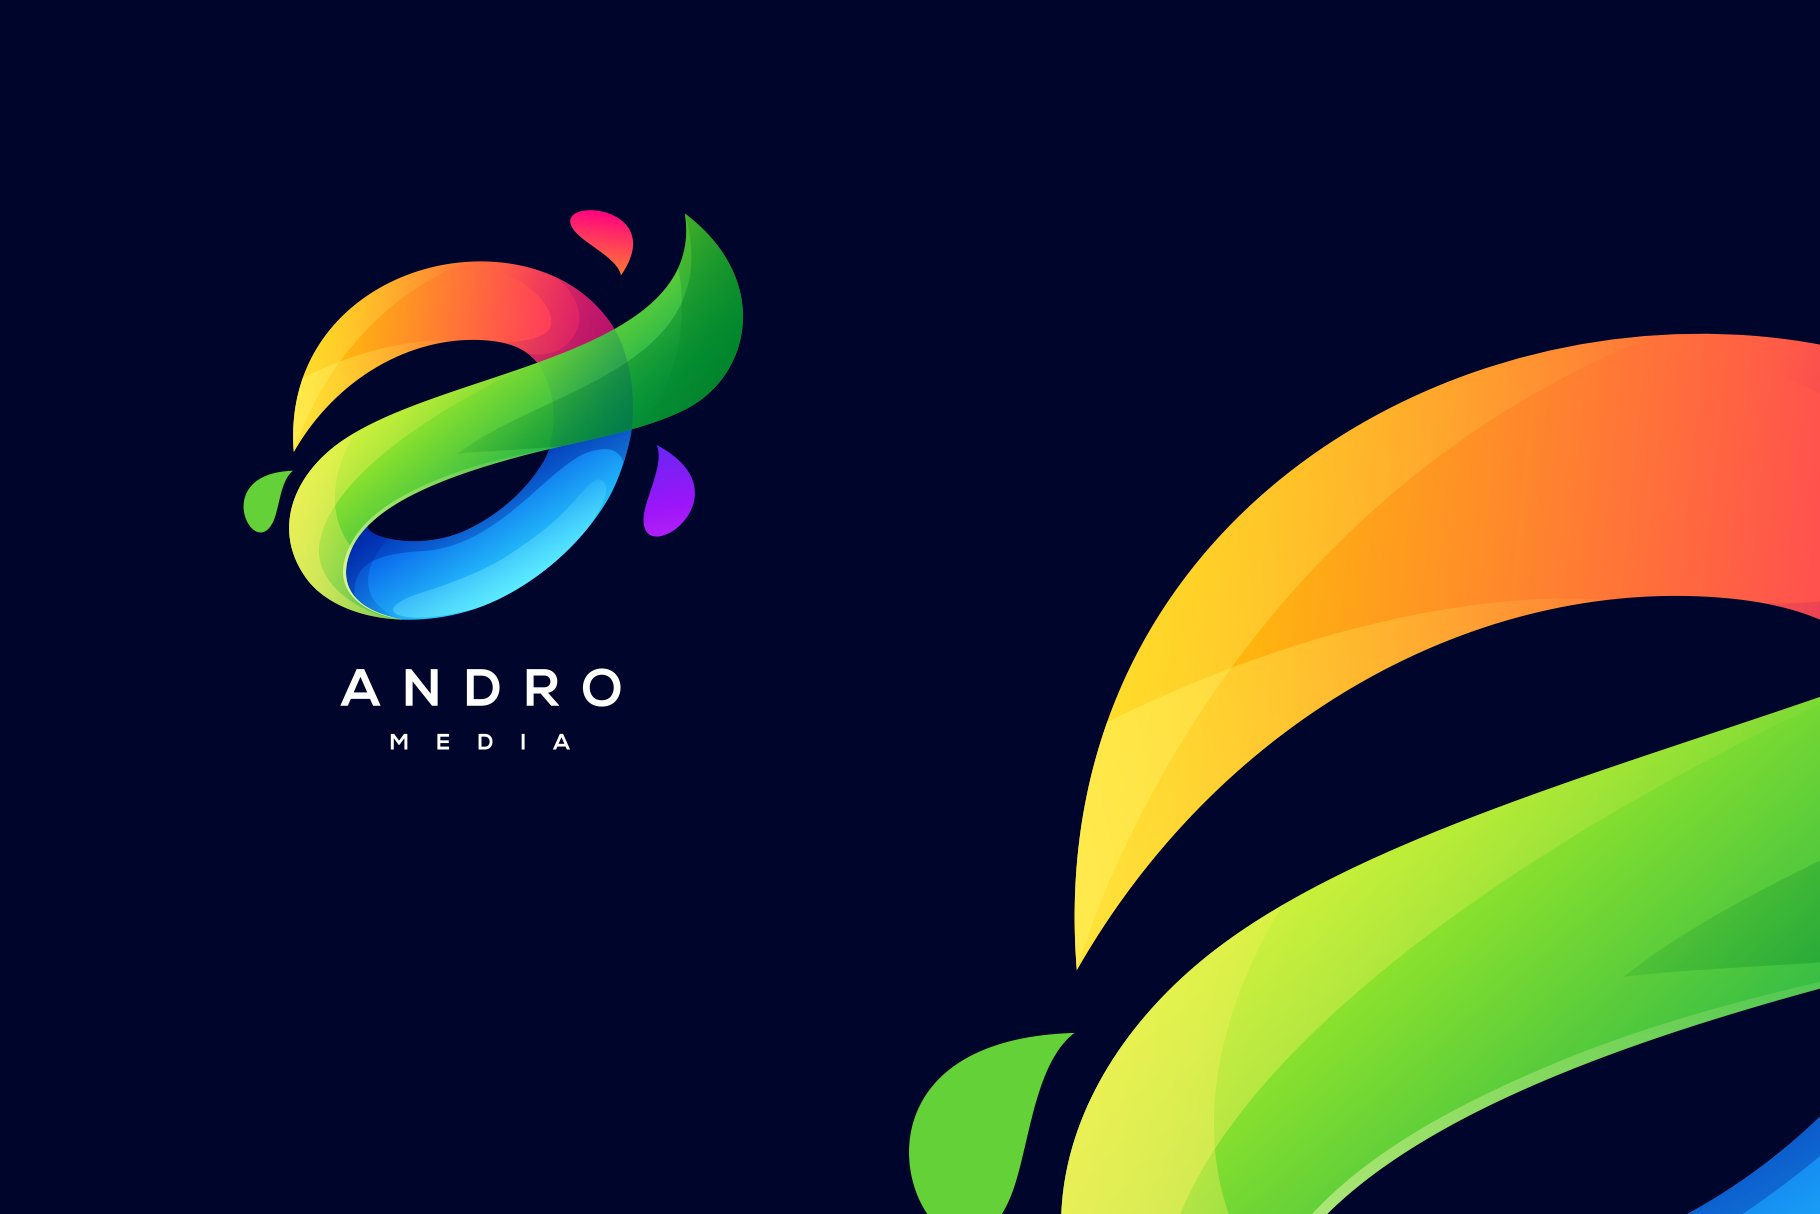 Andro Media colorful logo cover image.